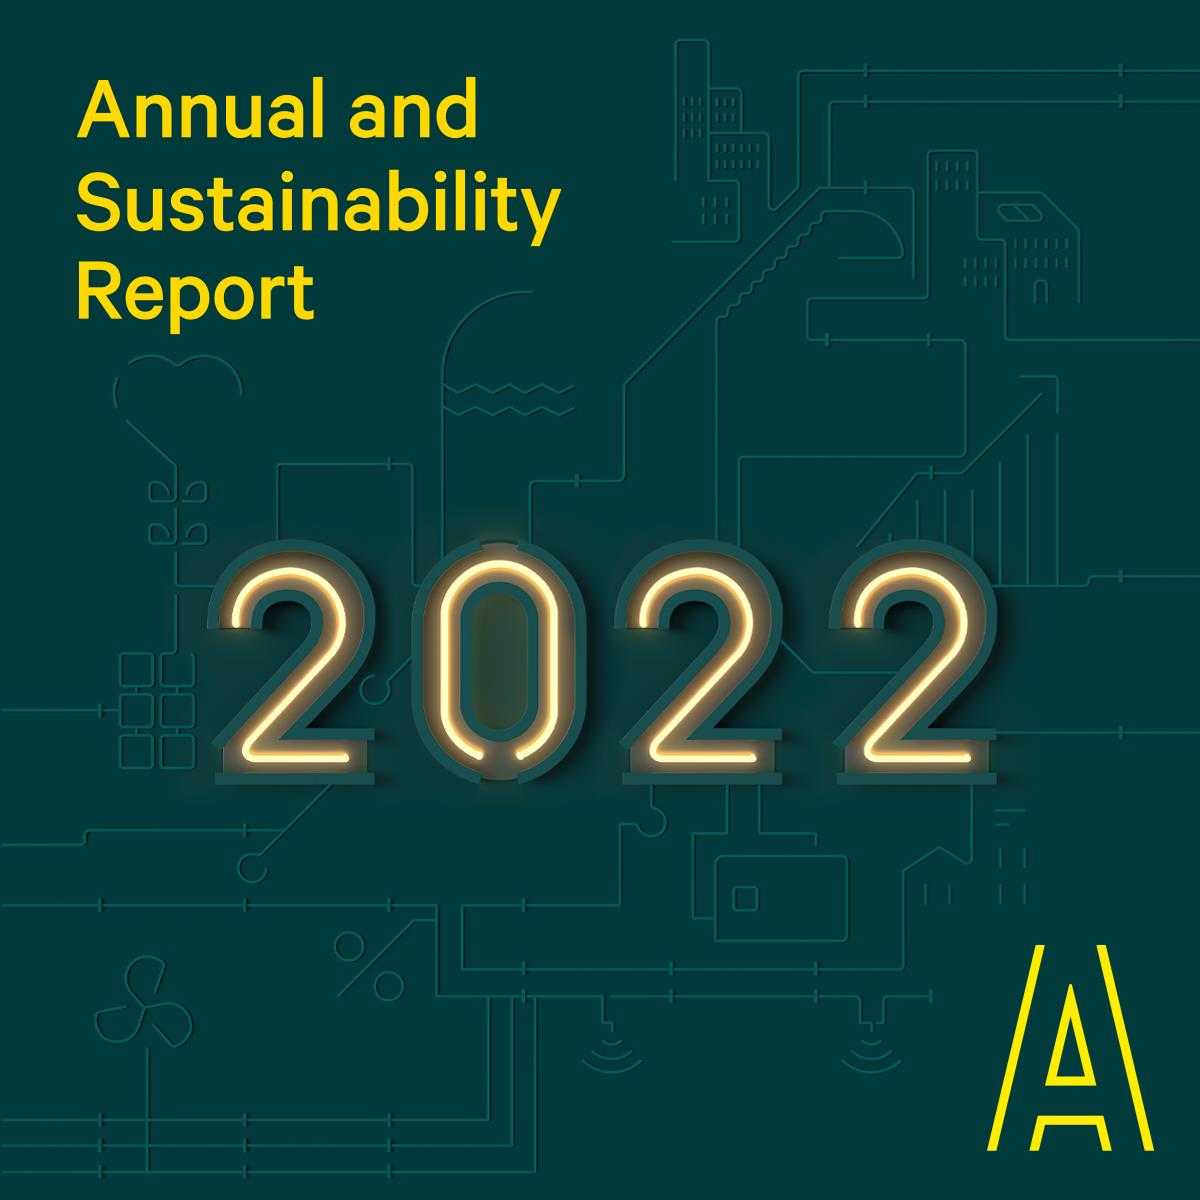 Assemblin’s Annual and Sustainability Report for 2022 is now published